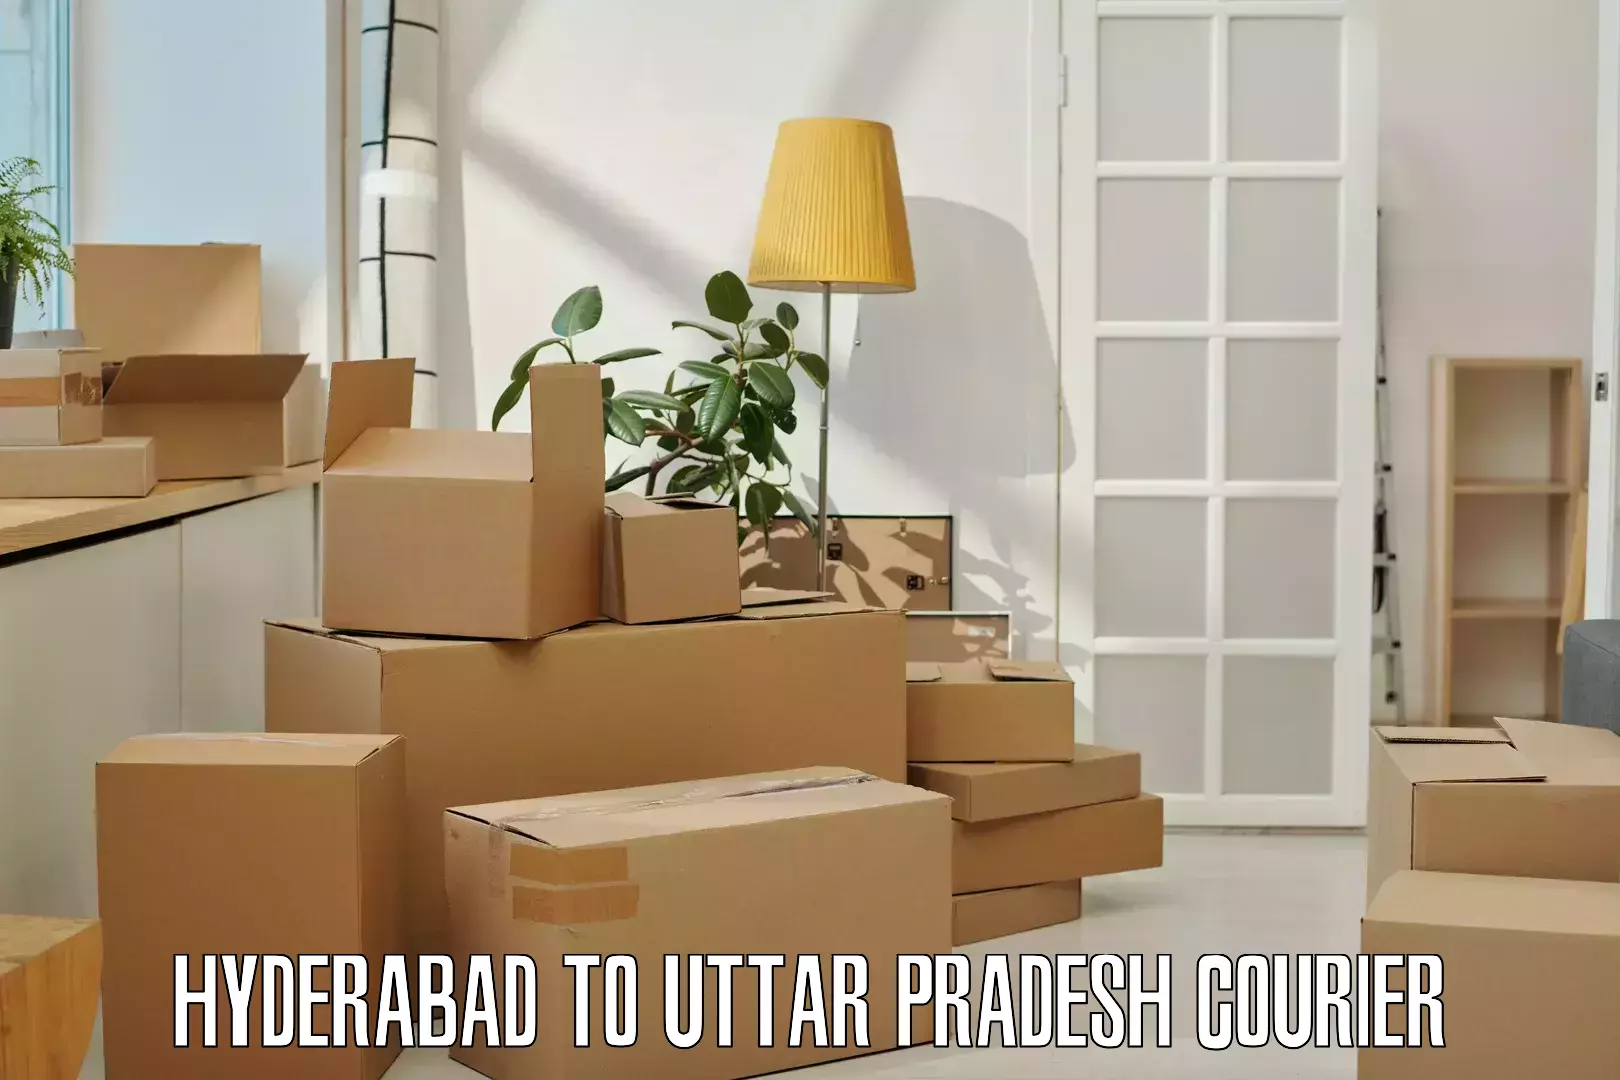 State-of-the-art courier technology Hyderabad to Nanpara